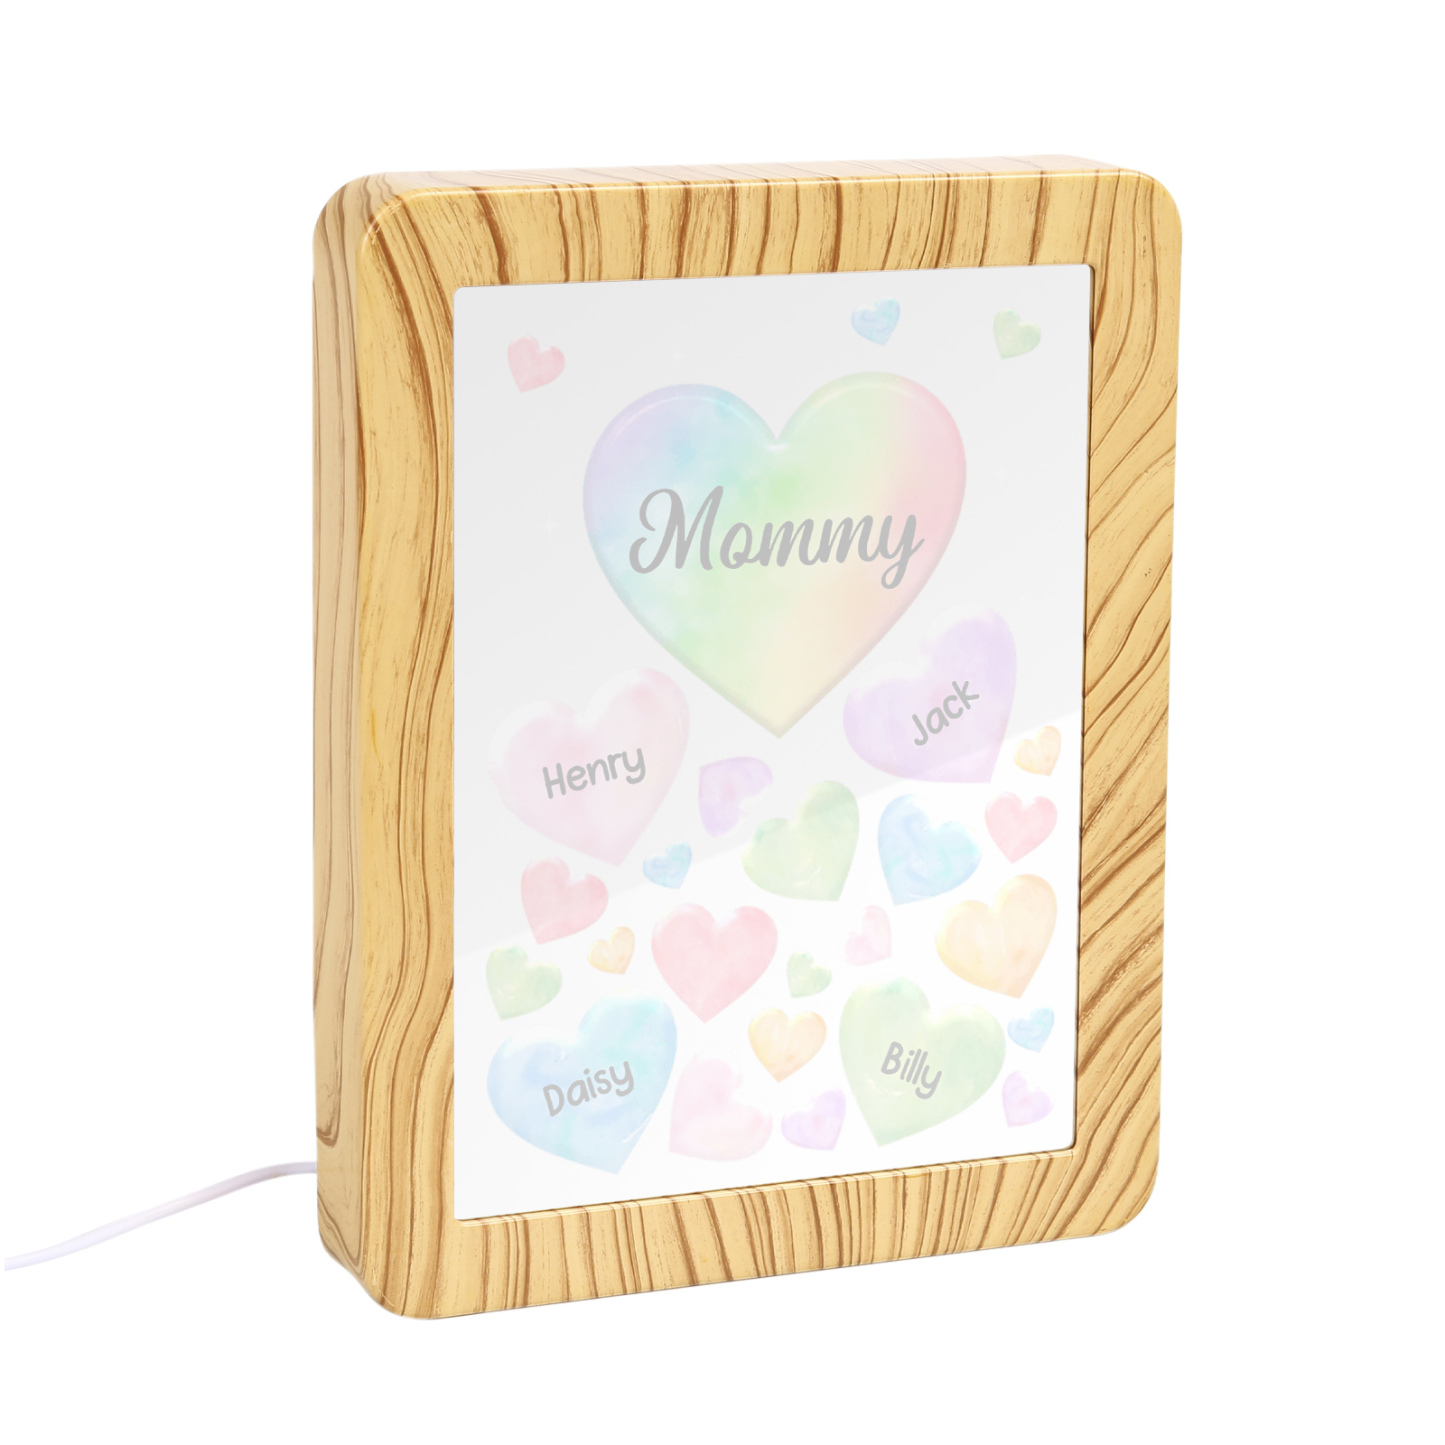 4 Names - Personalized Mom Home Wood Color Plug-in Mirror Photo Frame Custom Text LED Night Light Gift for Mom